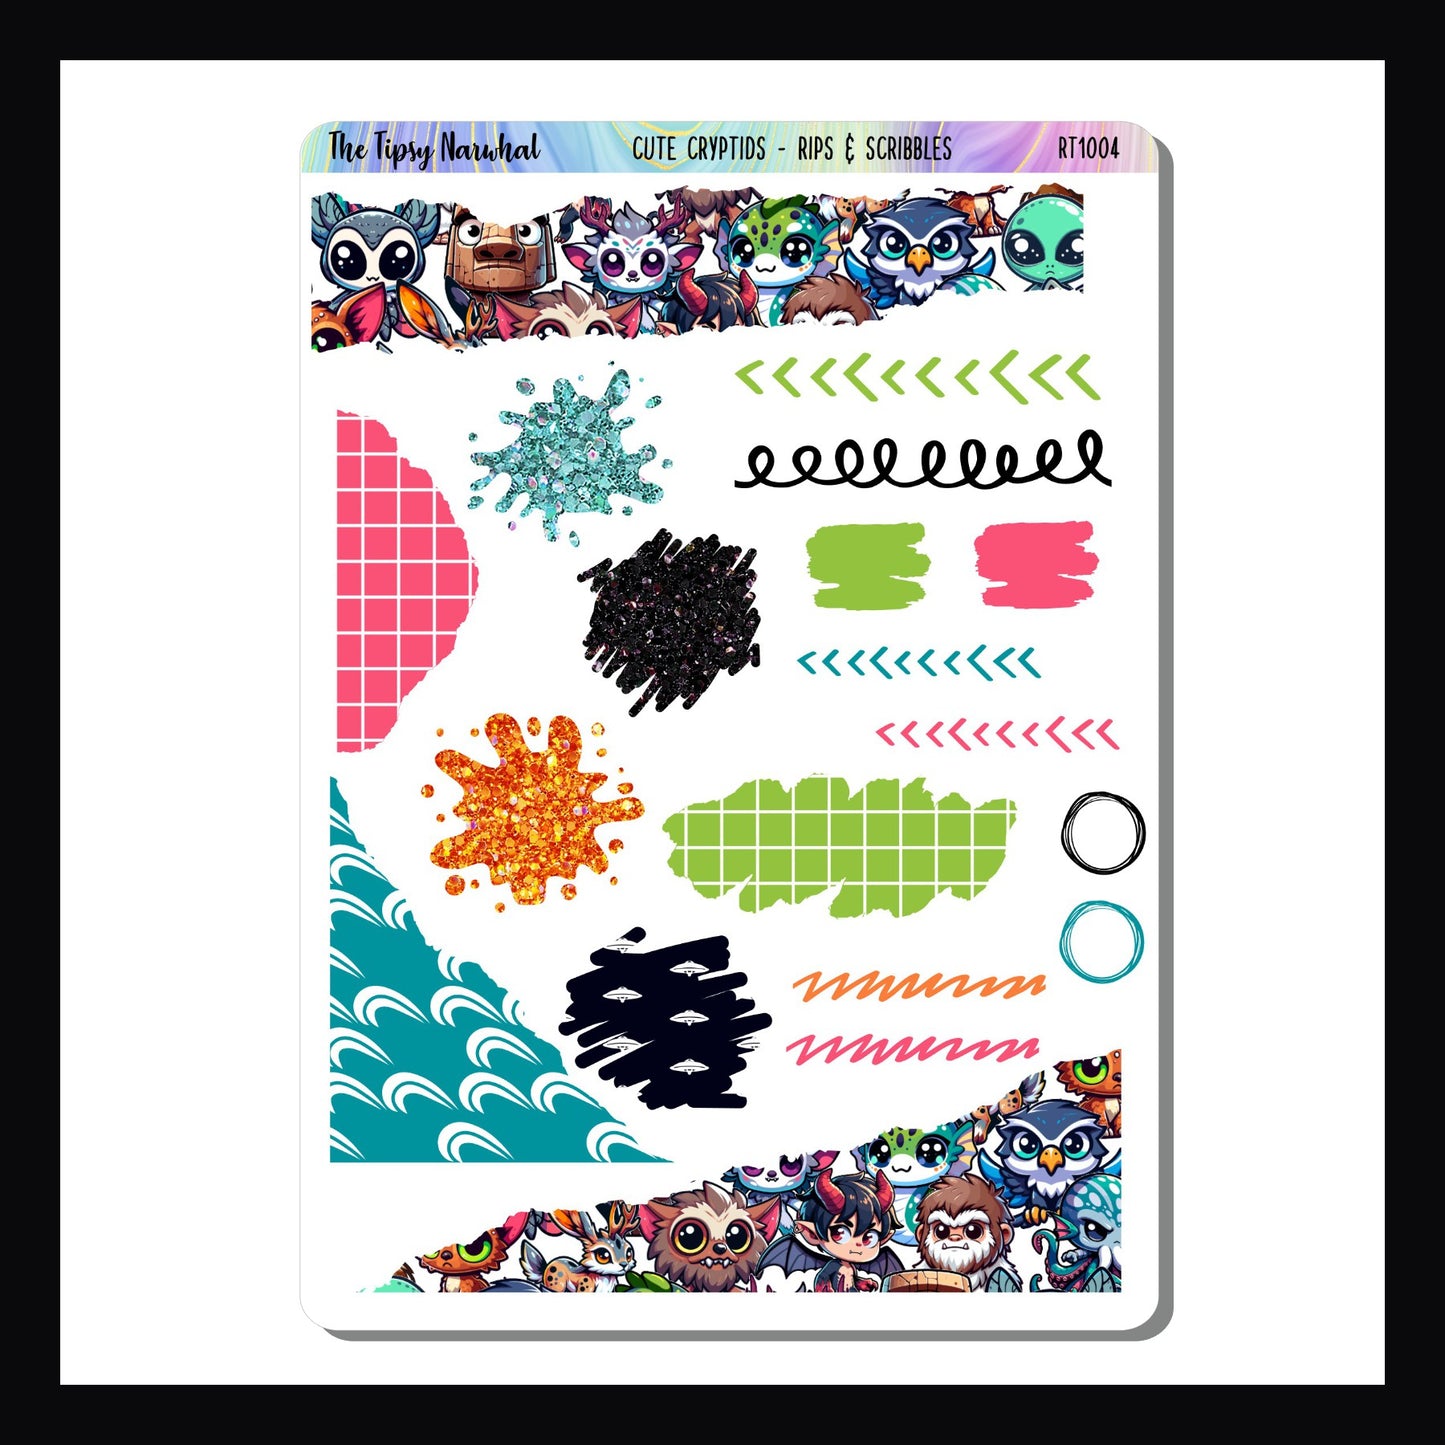 The Cute Cryptids Rips & Scribbles add-on sheet features various stickers with a ripped edge appearance and additional scribble like stickers.  All coordinating with the Cute Cryptids Hobonichi Cousin kit. 